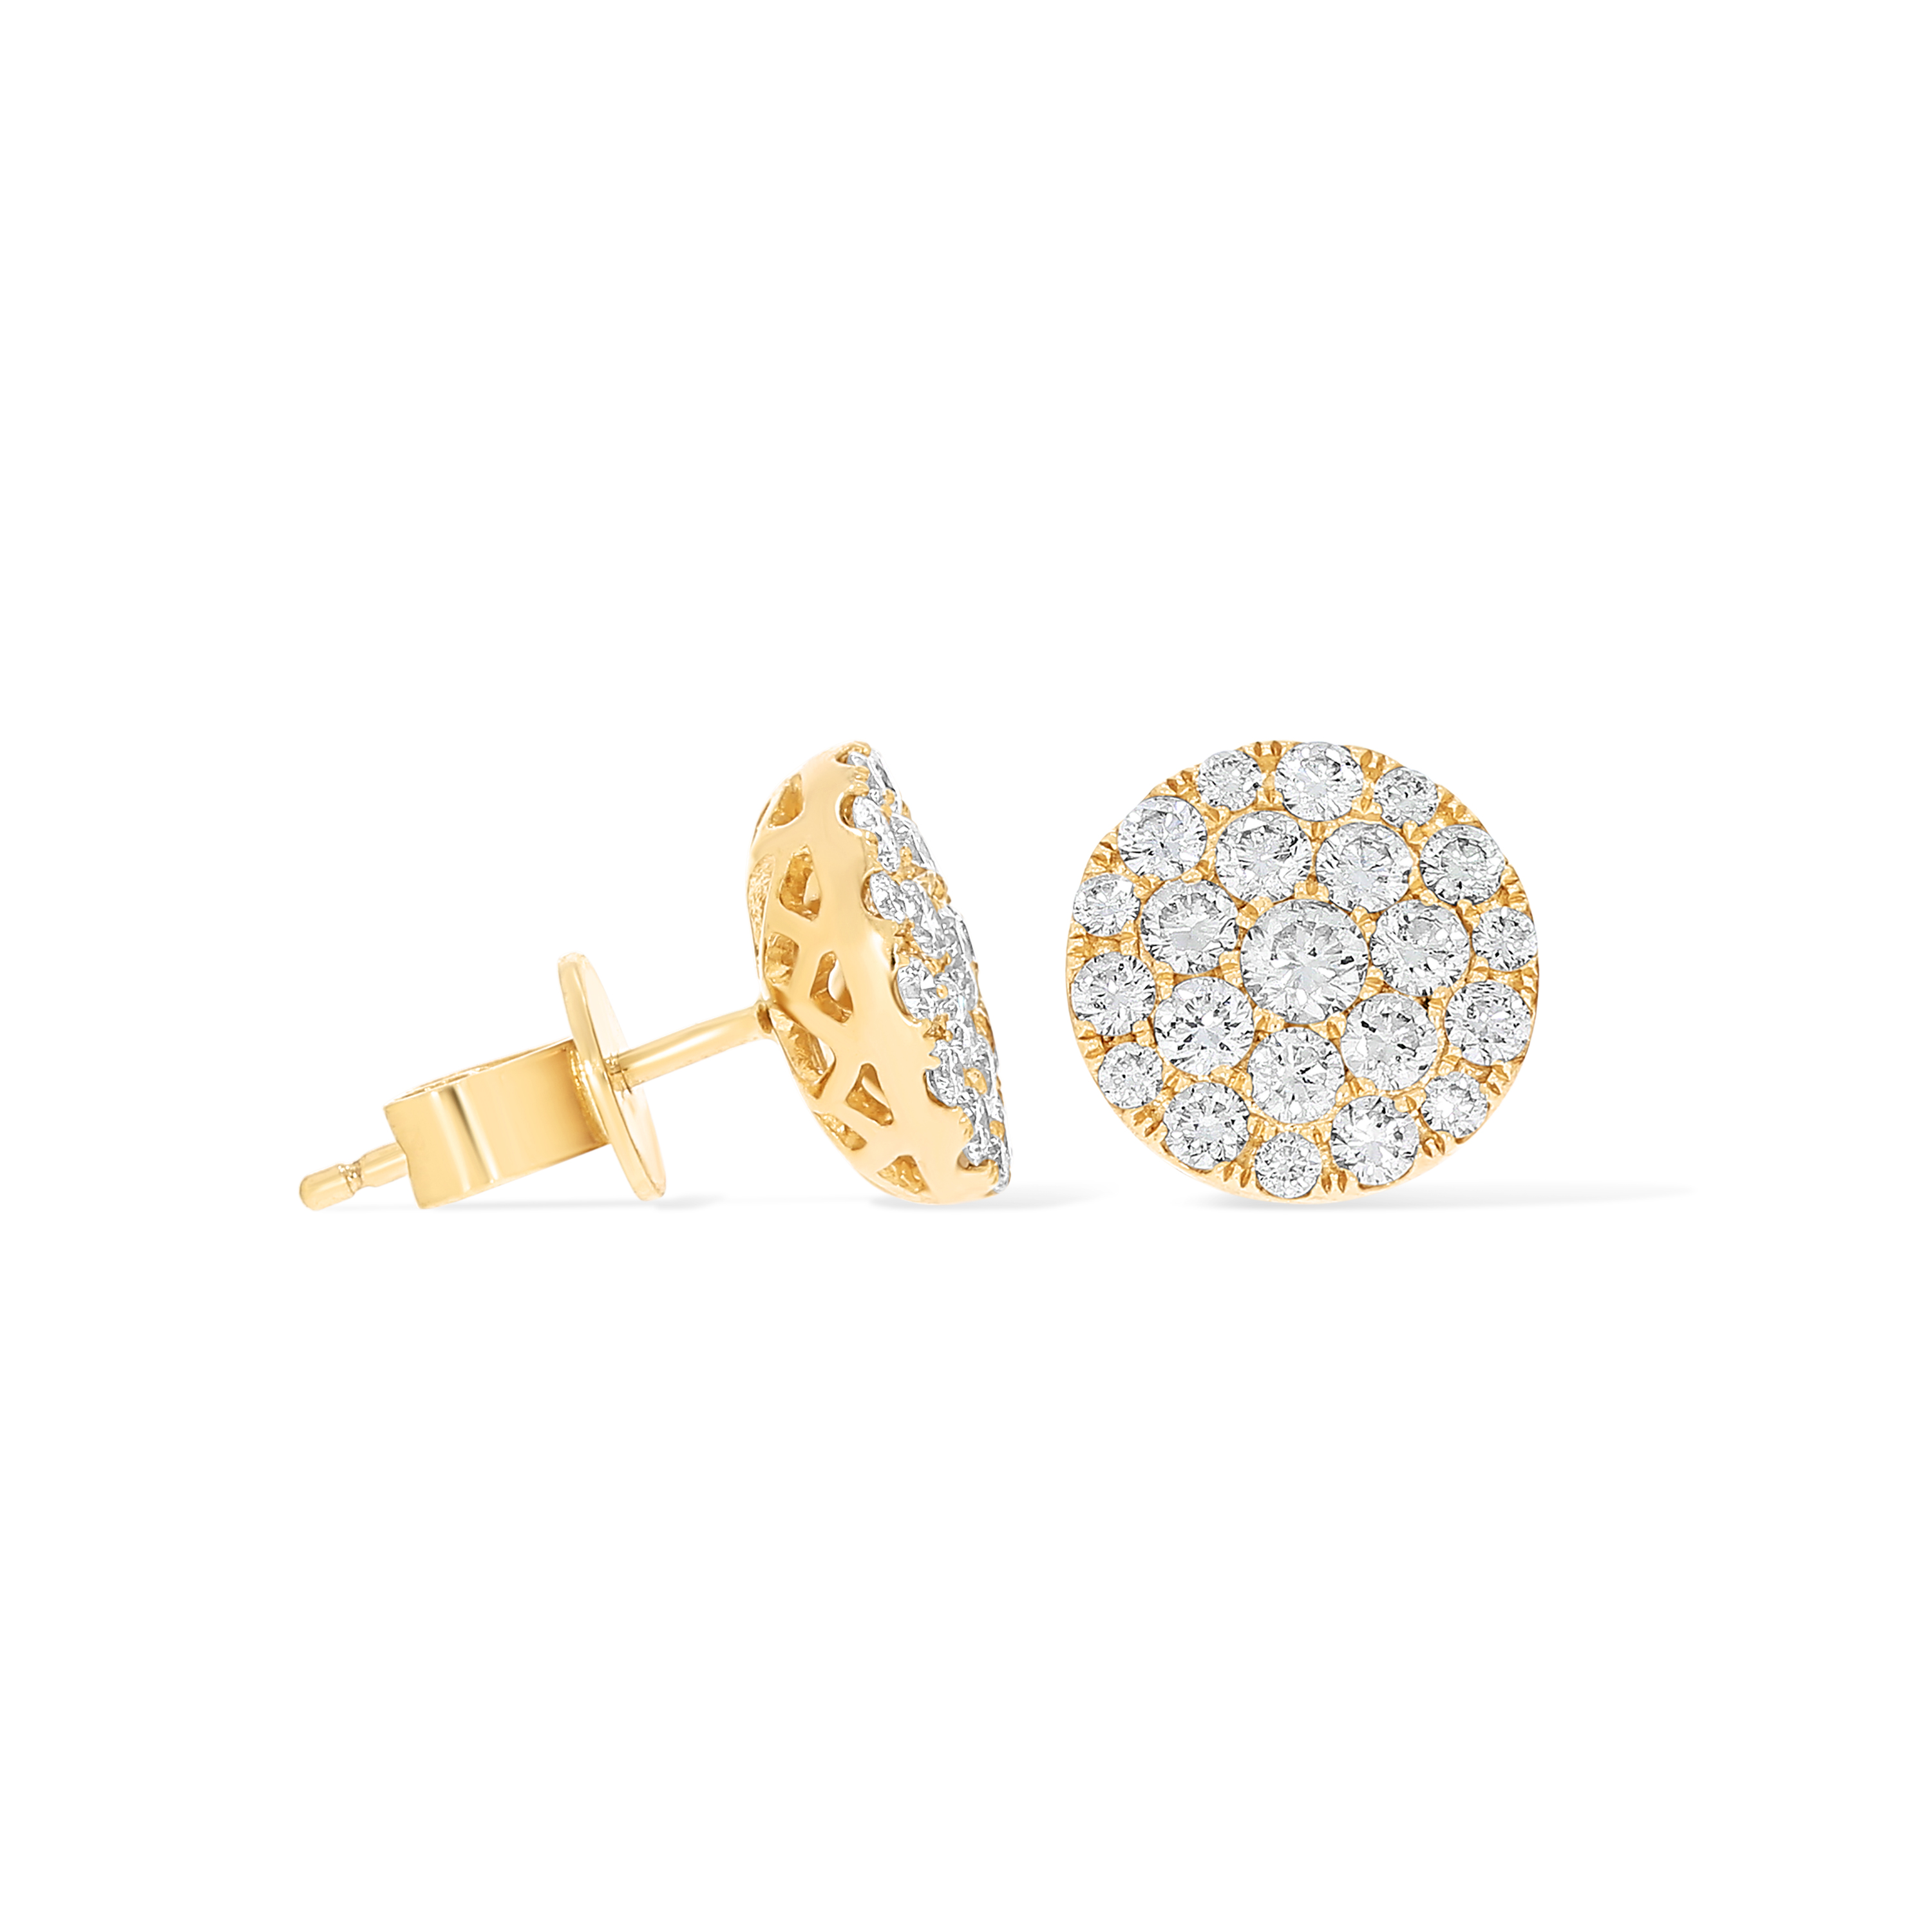 Diamond Cluster Round Earrings 1.14 ct. 14k Yellow Gold